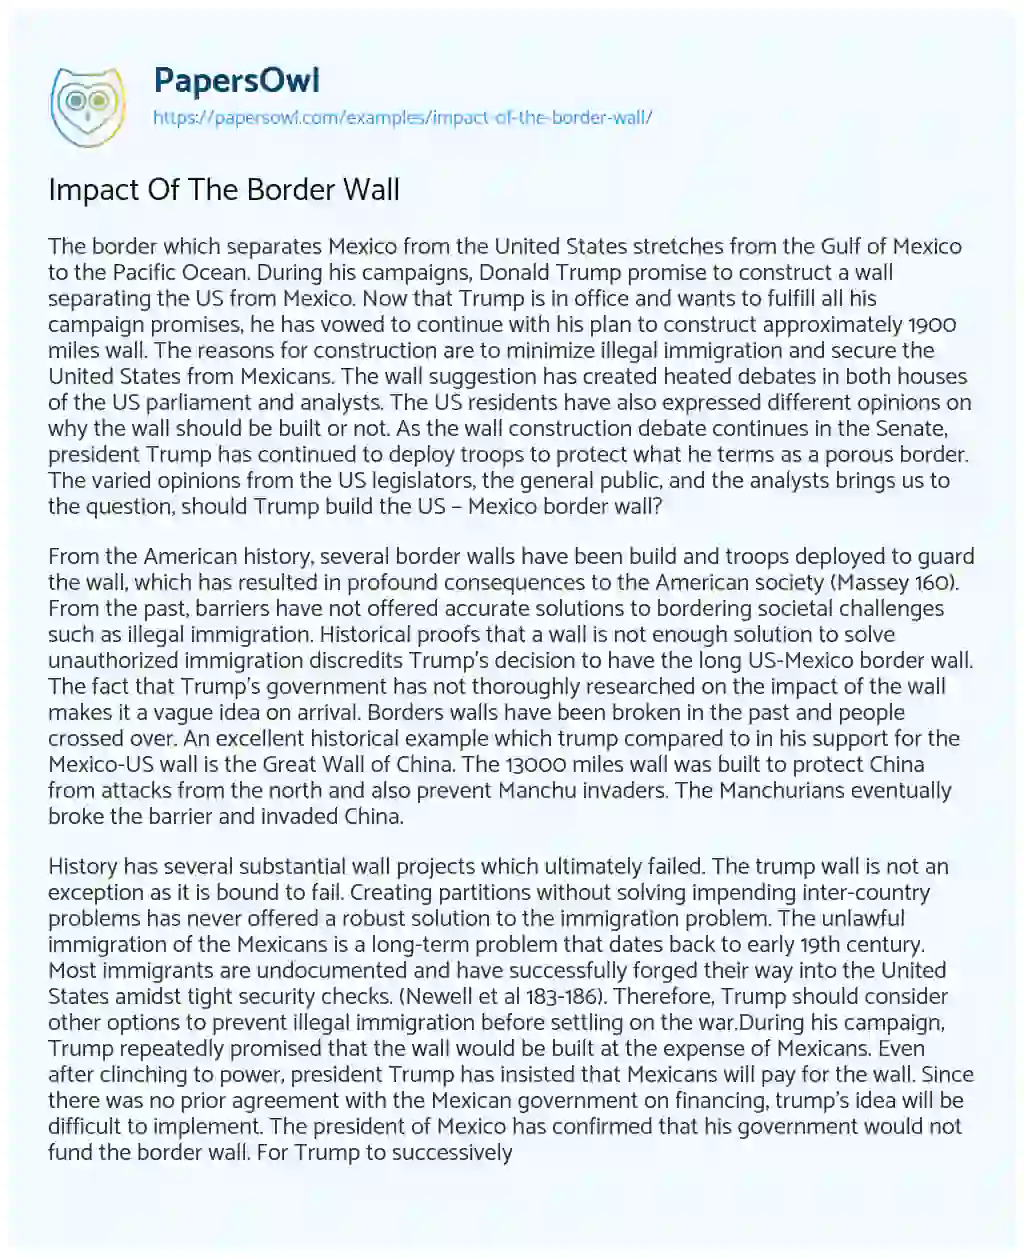 Essay on Impact of the Border Wall